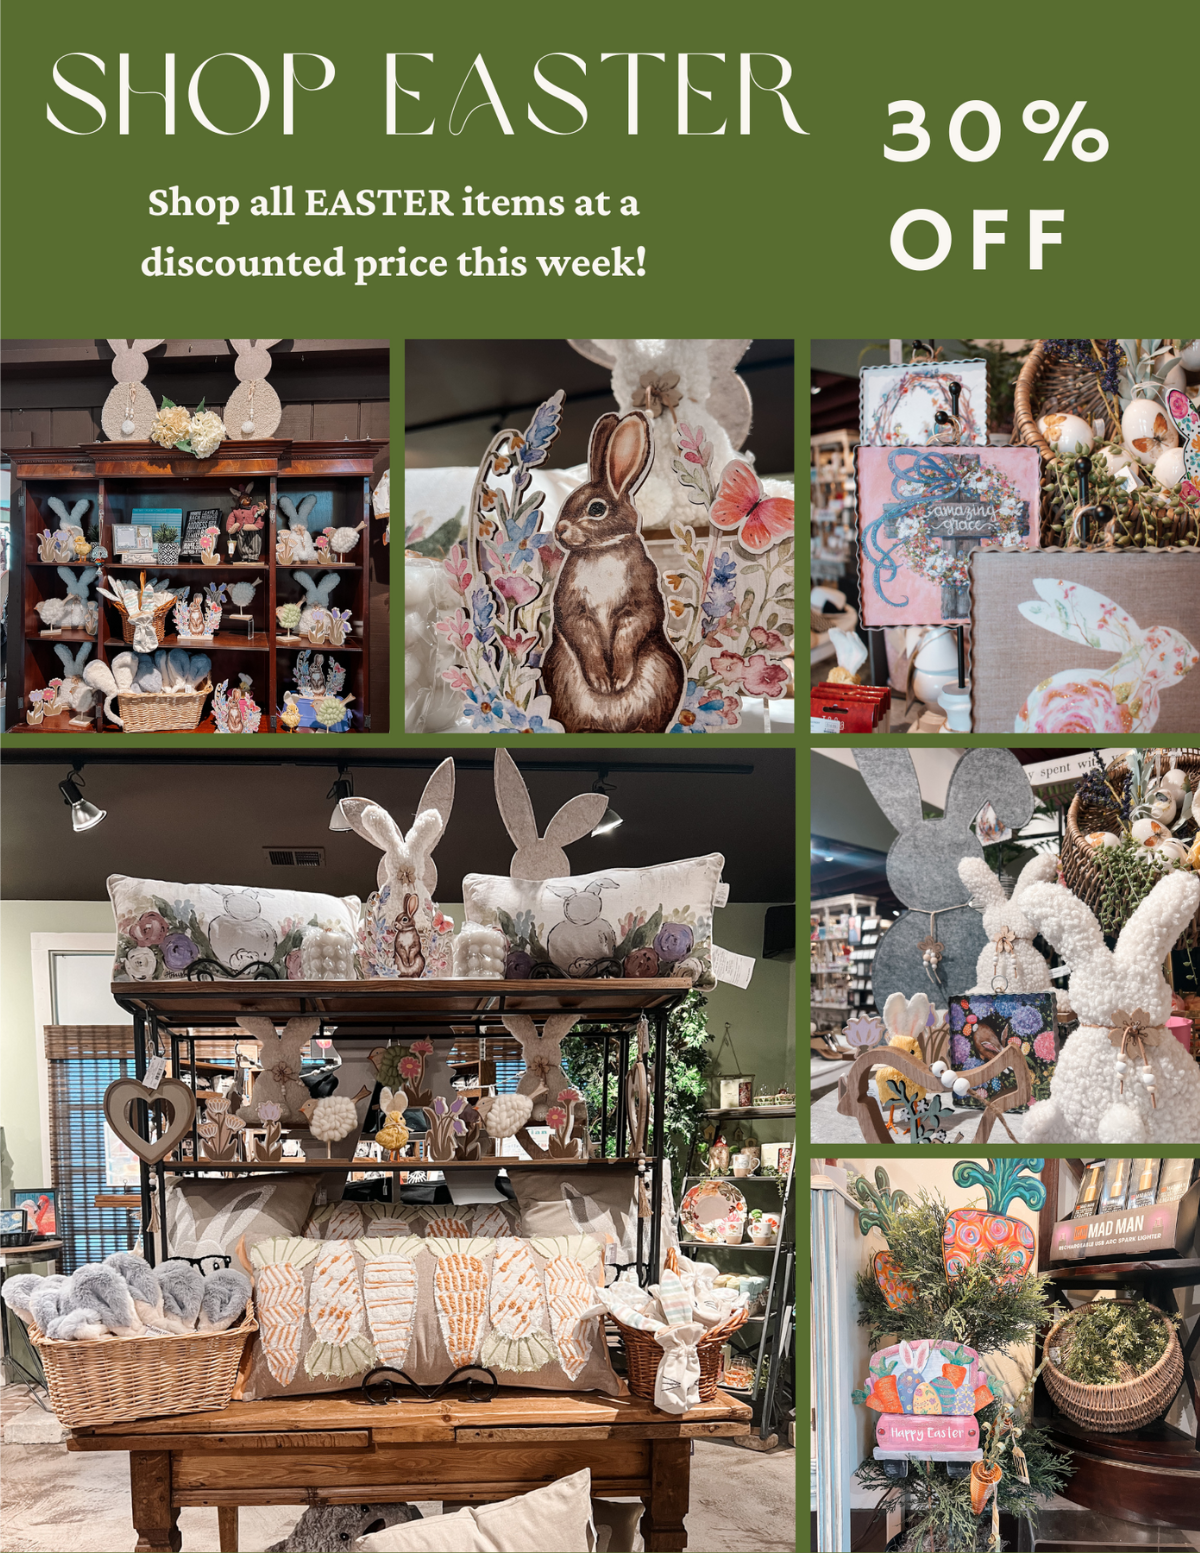 Easter items are on sale 50% OFF